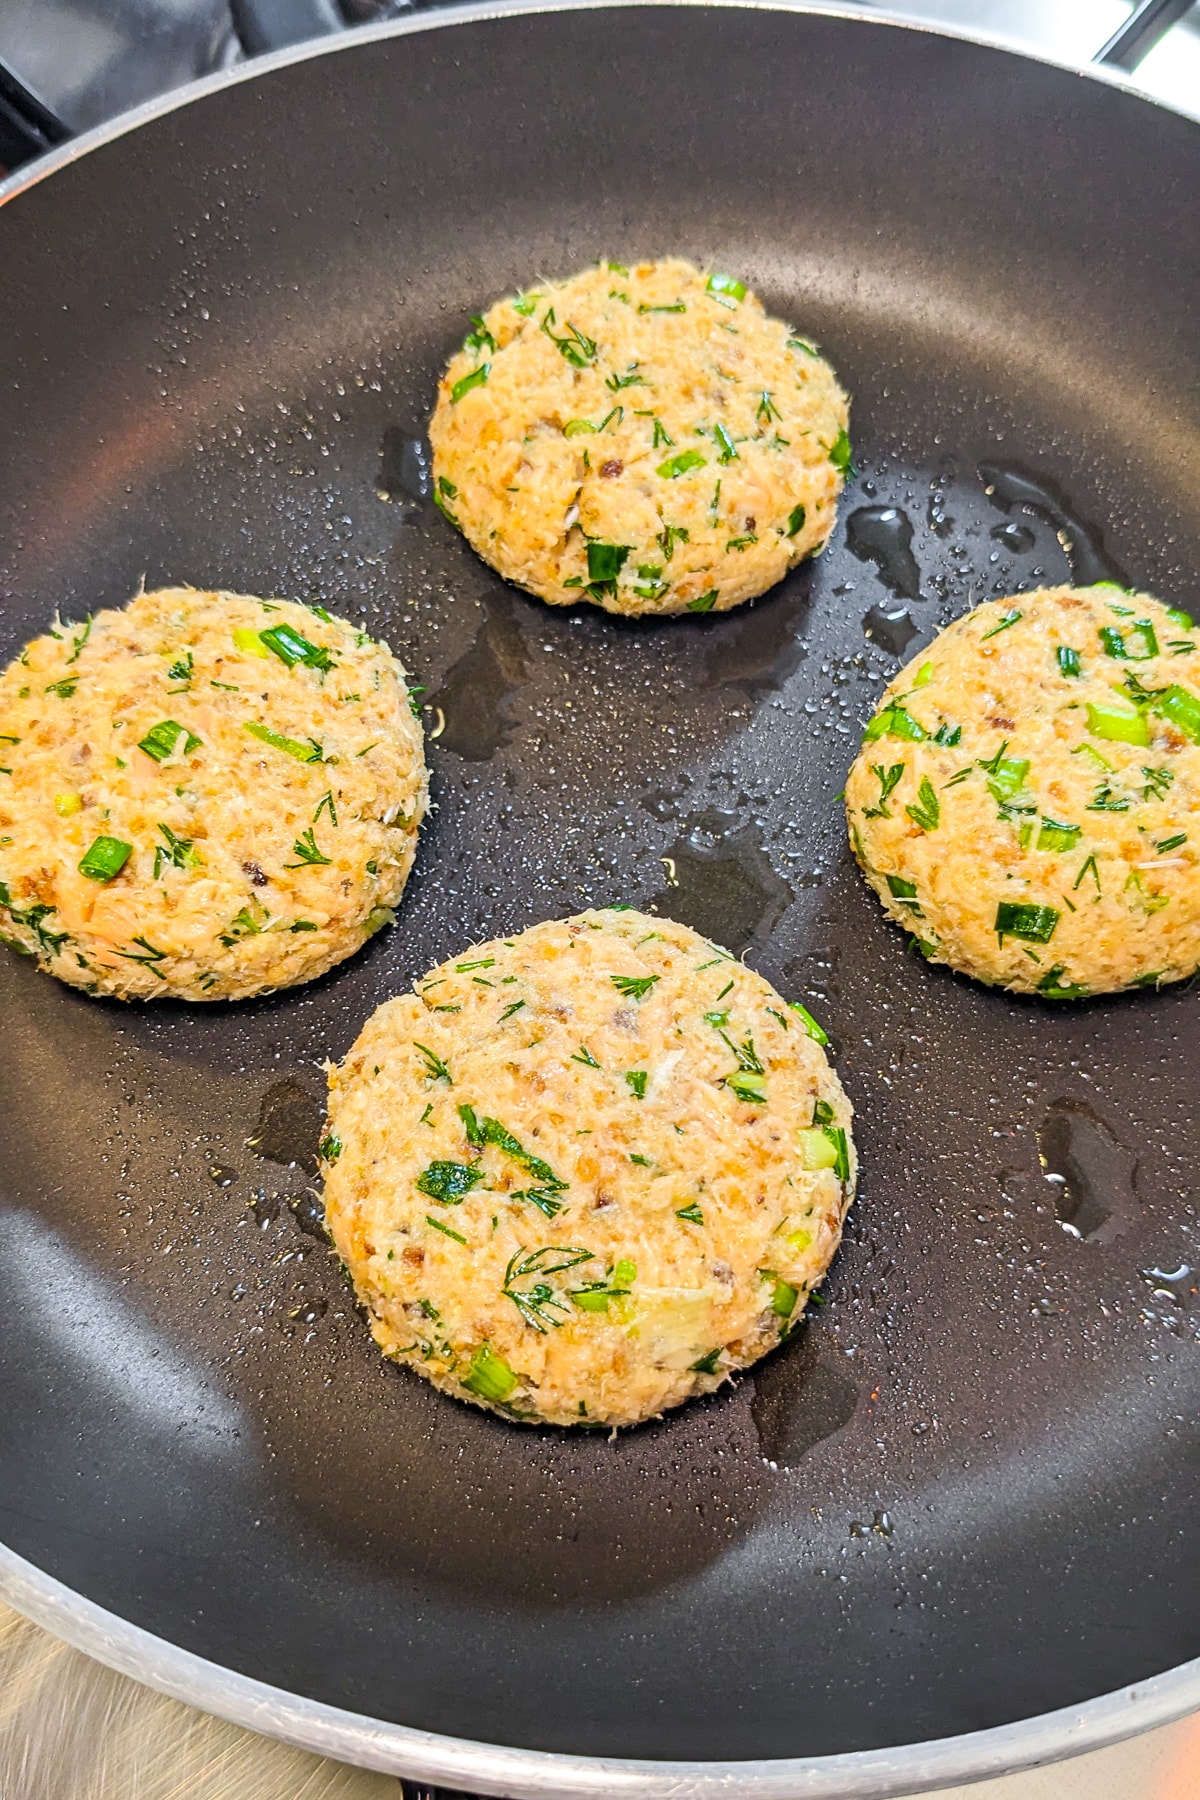 4 salmon patties in a frying pan on the stove.